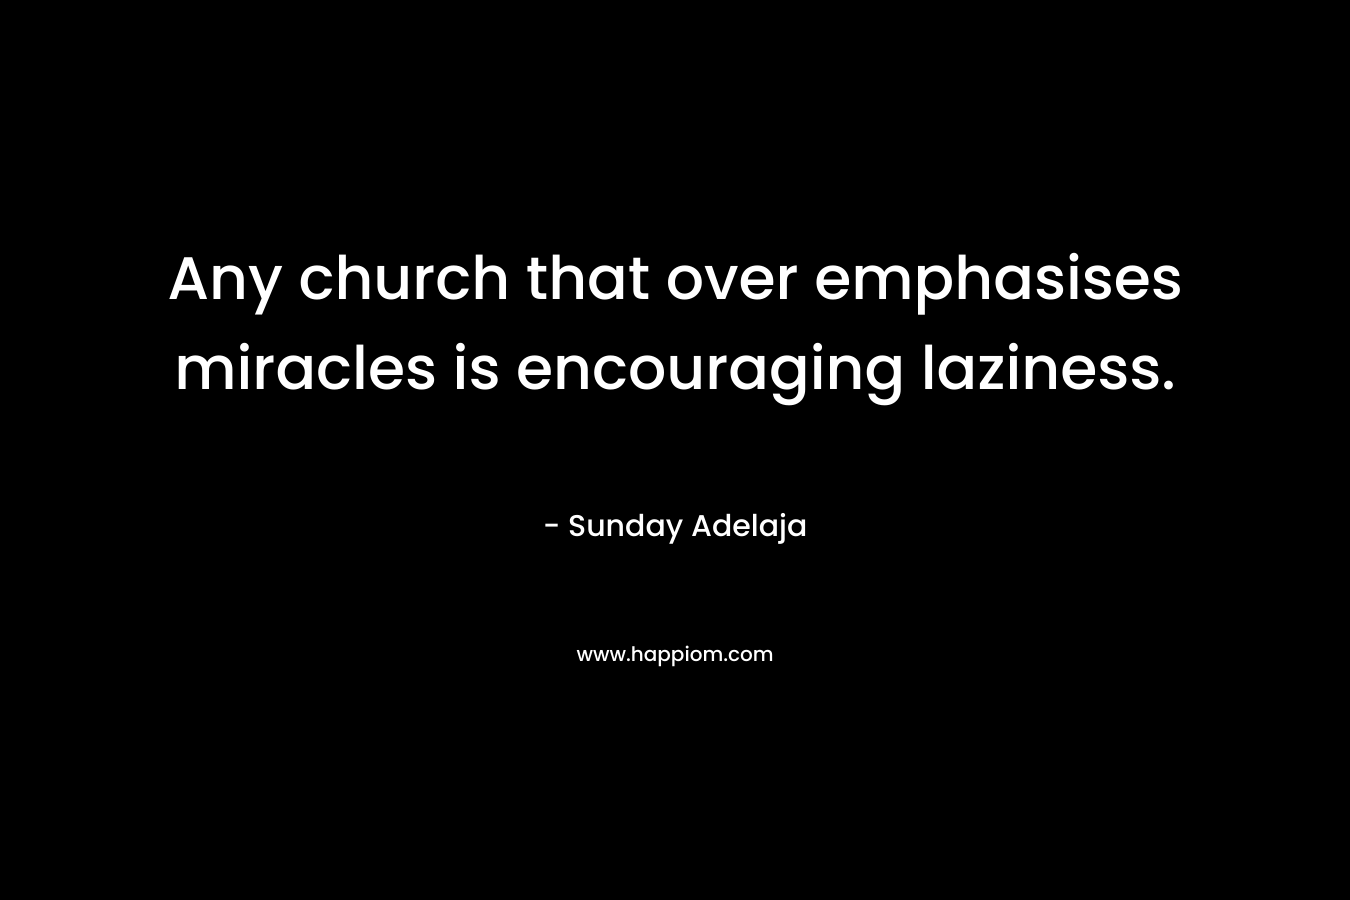 Any church that over emphasises miracles is encouraging laziness.